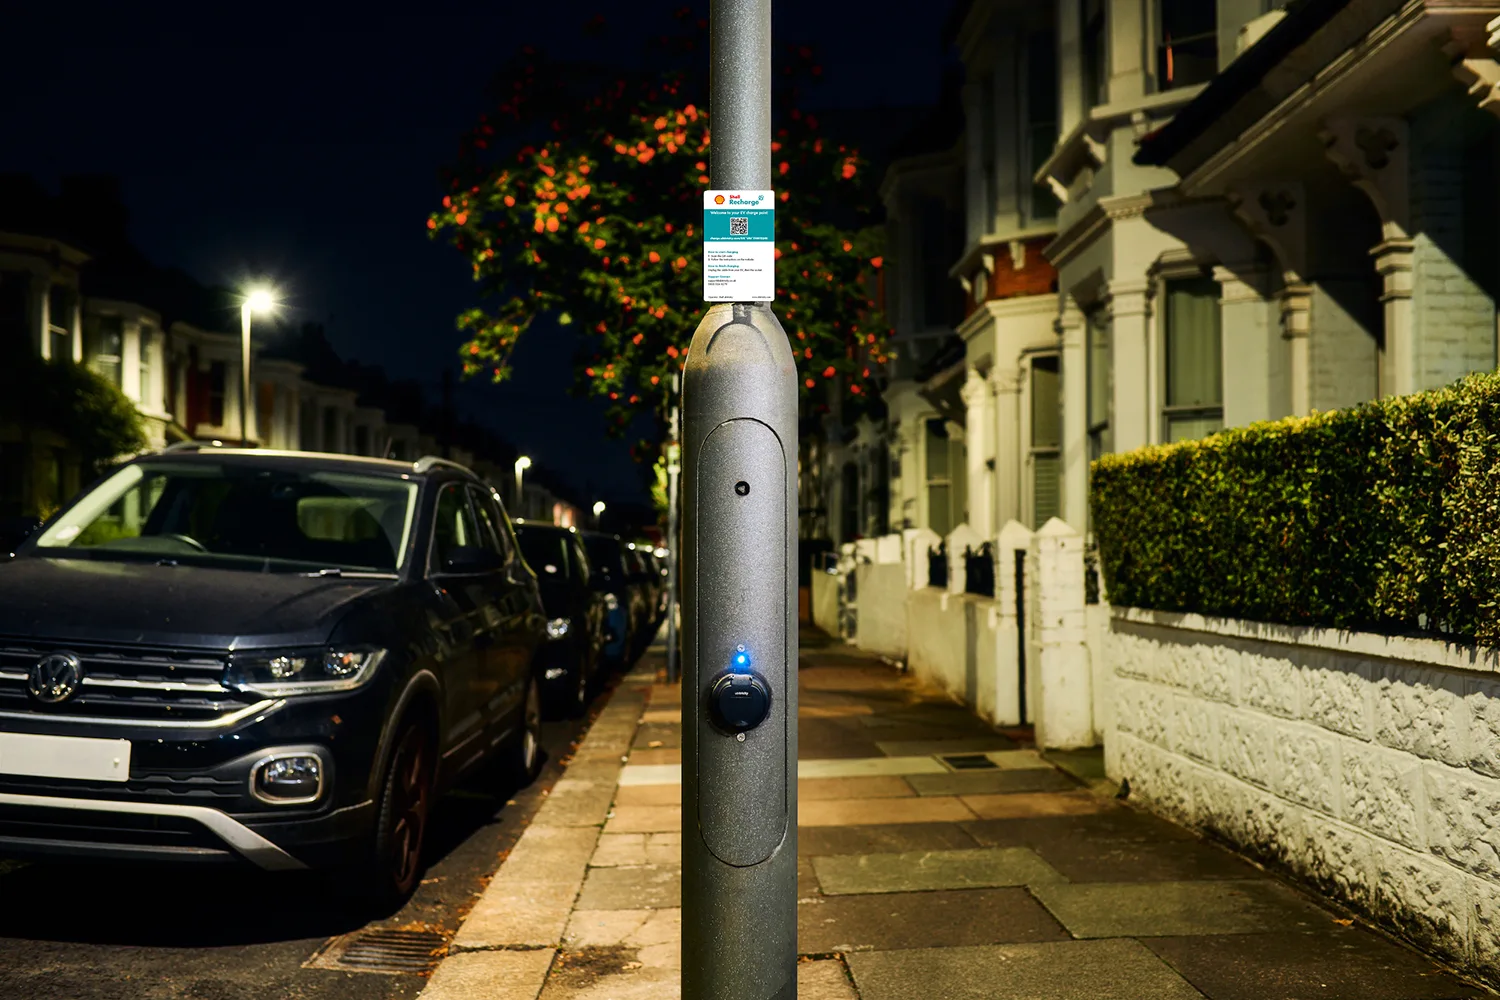 An ubitricity-operated lamppost charger is shown at night, used by local authorities to rapidly expand the public charging infrastructure.